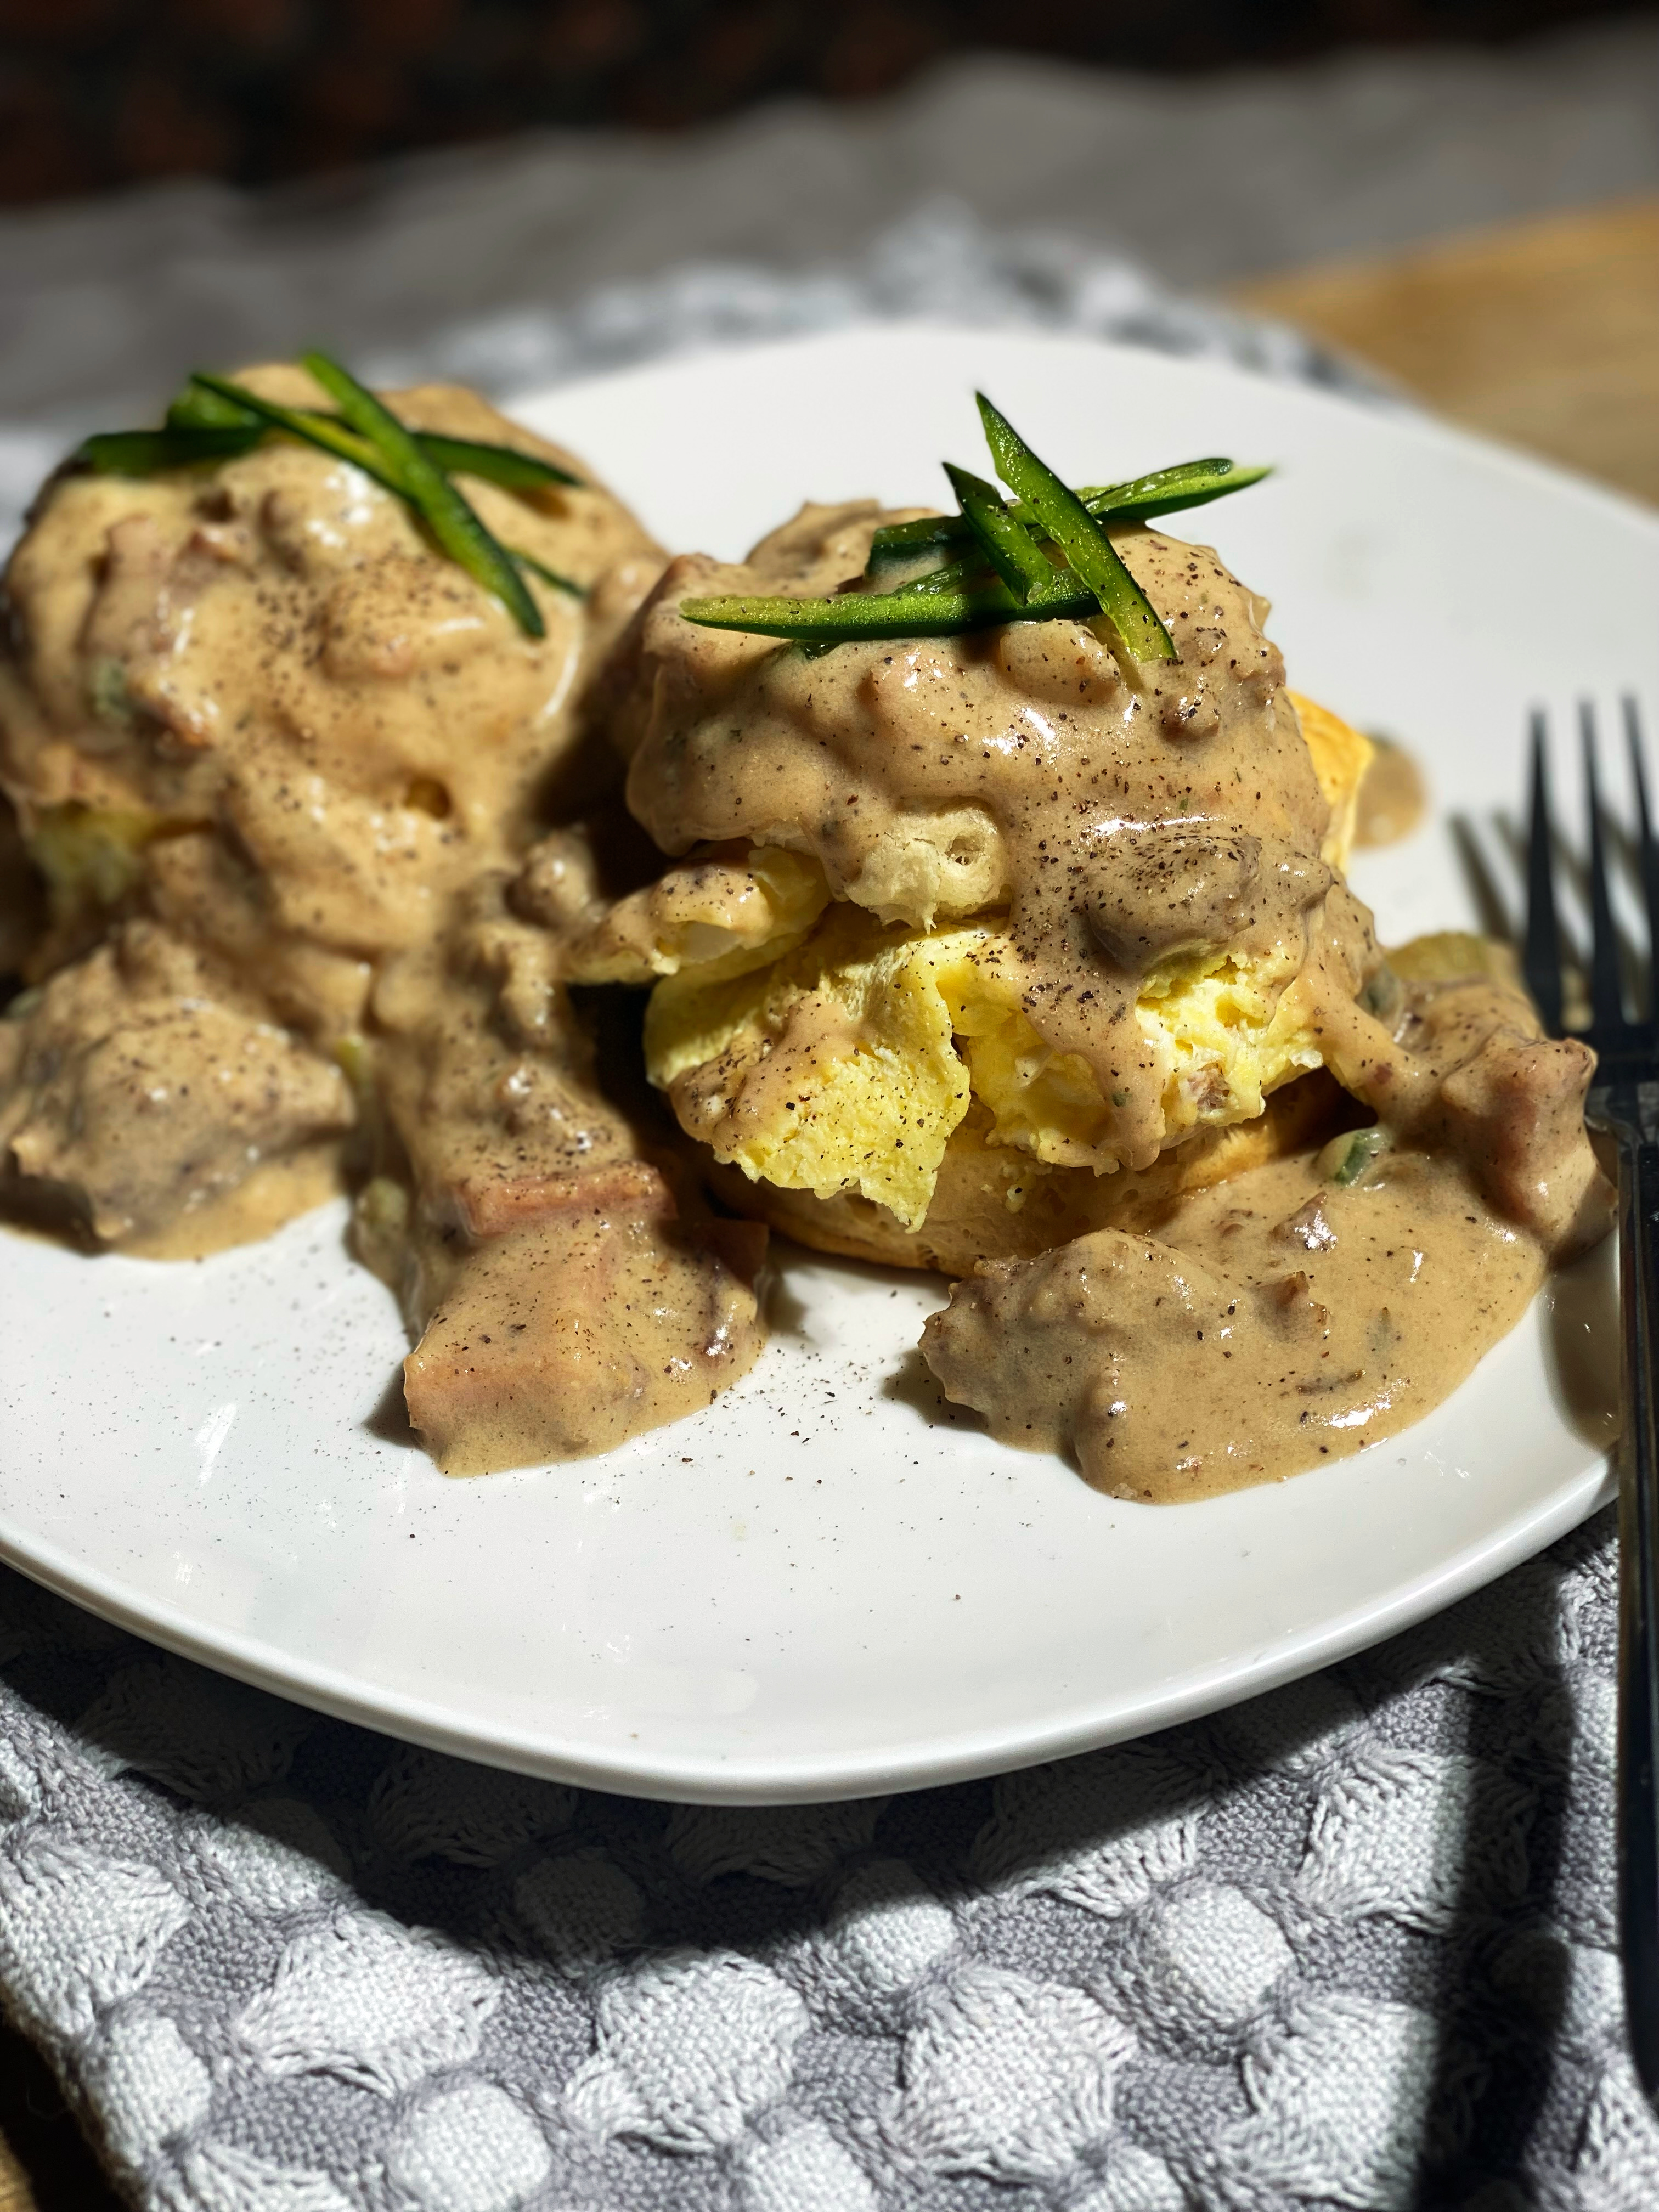 Overhead shot of the plated biscuits and gravy sitting on a grey and white checkered cloth. Biscuit filled with a fluffy scrambled egg, and topped with sausage and ham gravy.